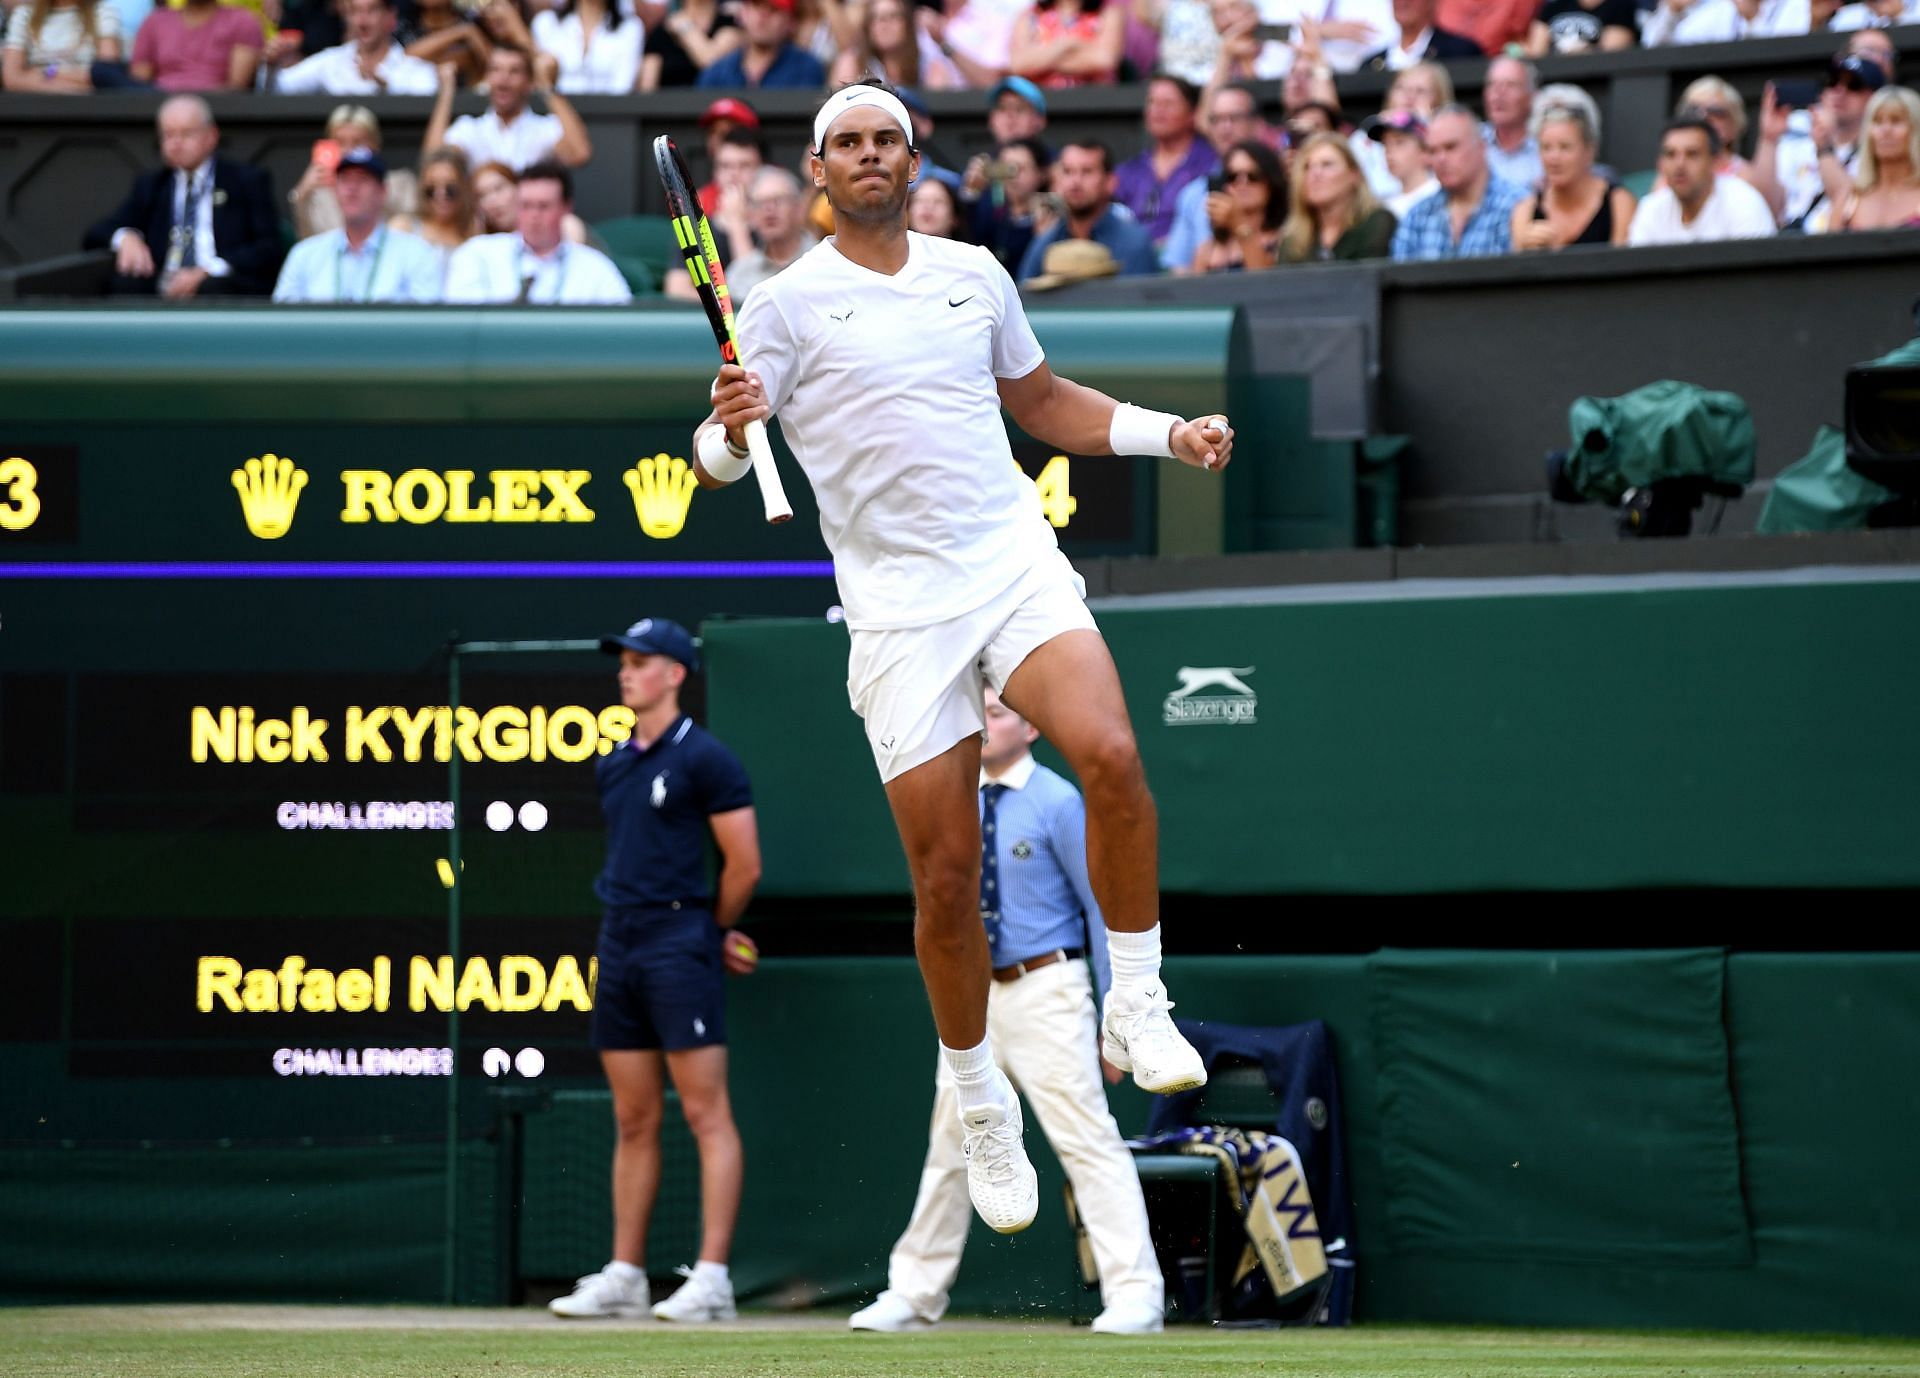 Nick Kyrgios Day Four: The Championships - Wimbledon 2019